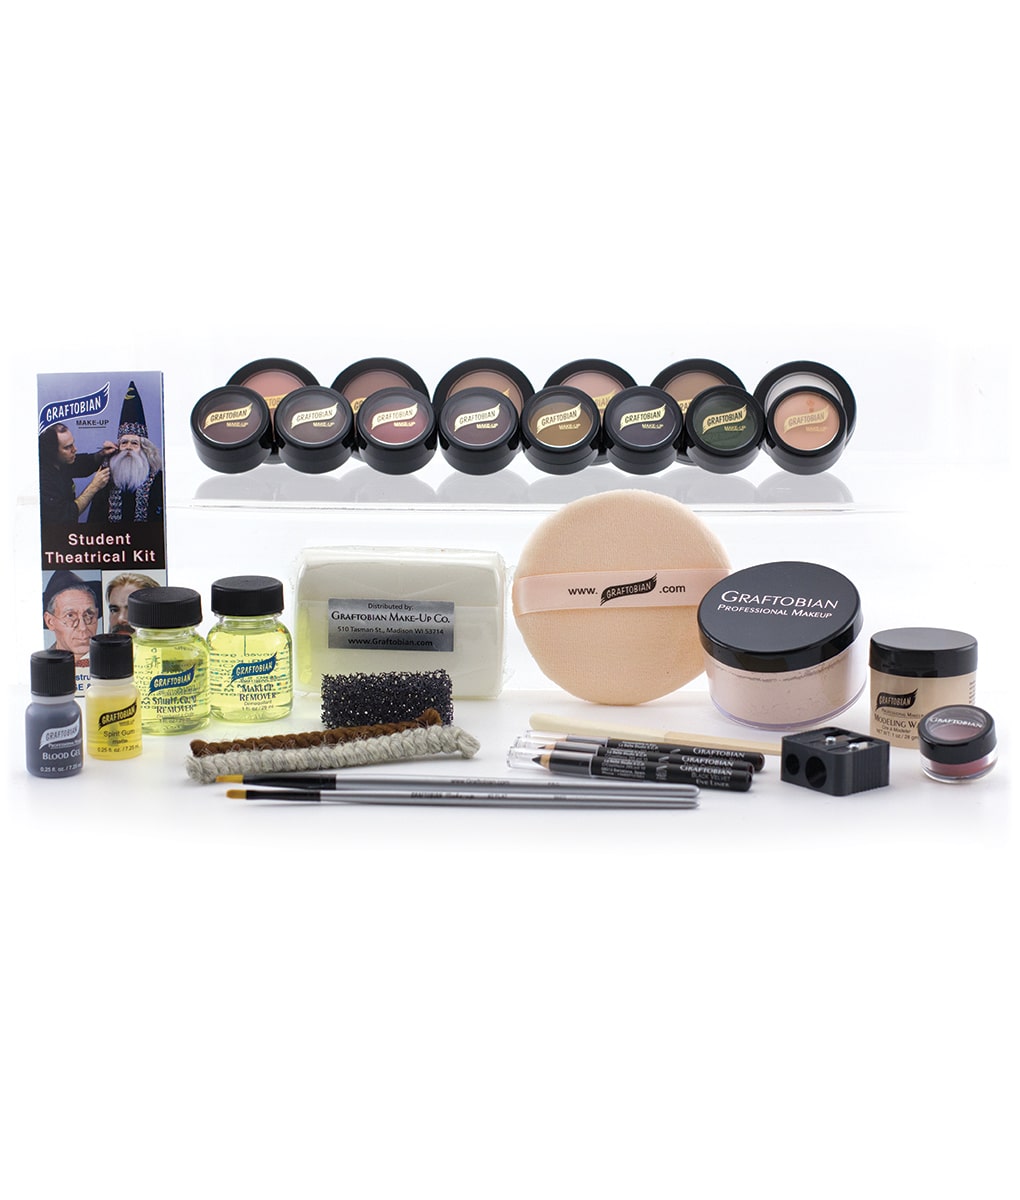 Building Your First Stage Makeup Kit - Dramatics Magazine